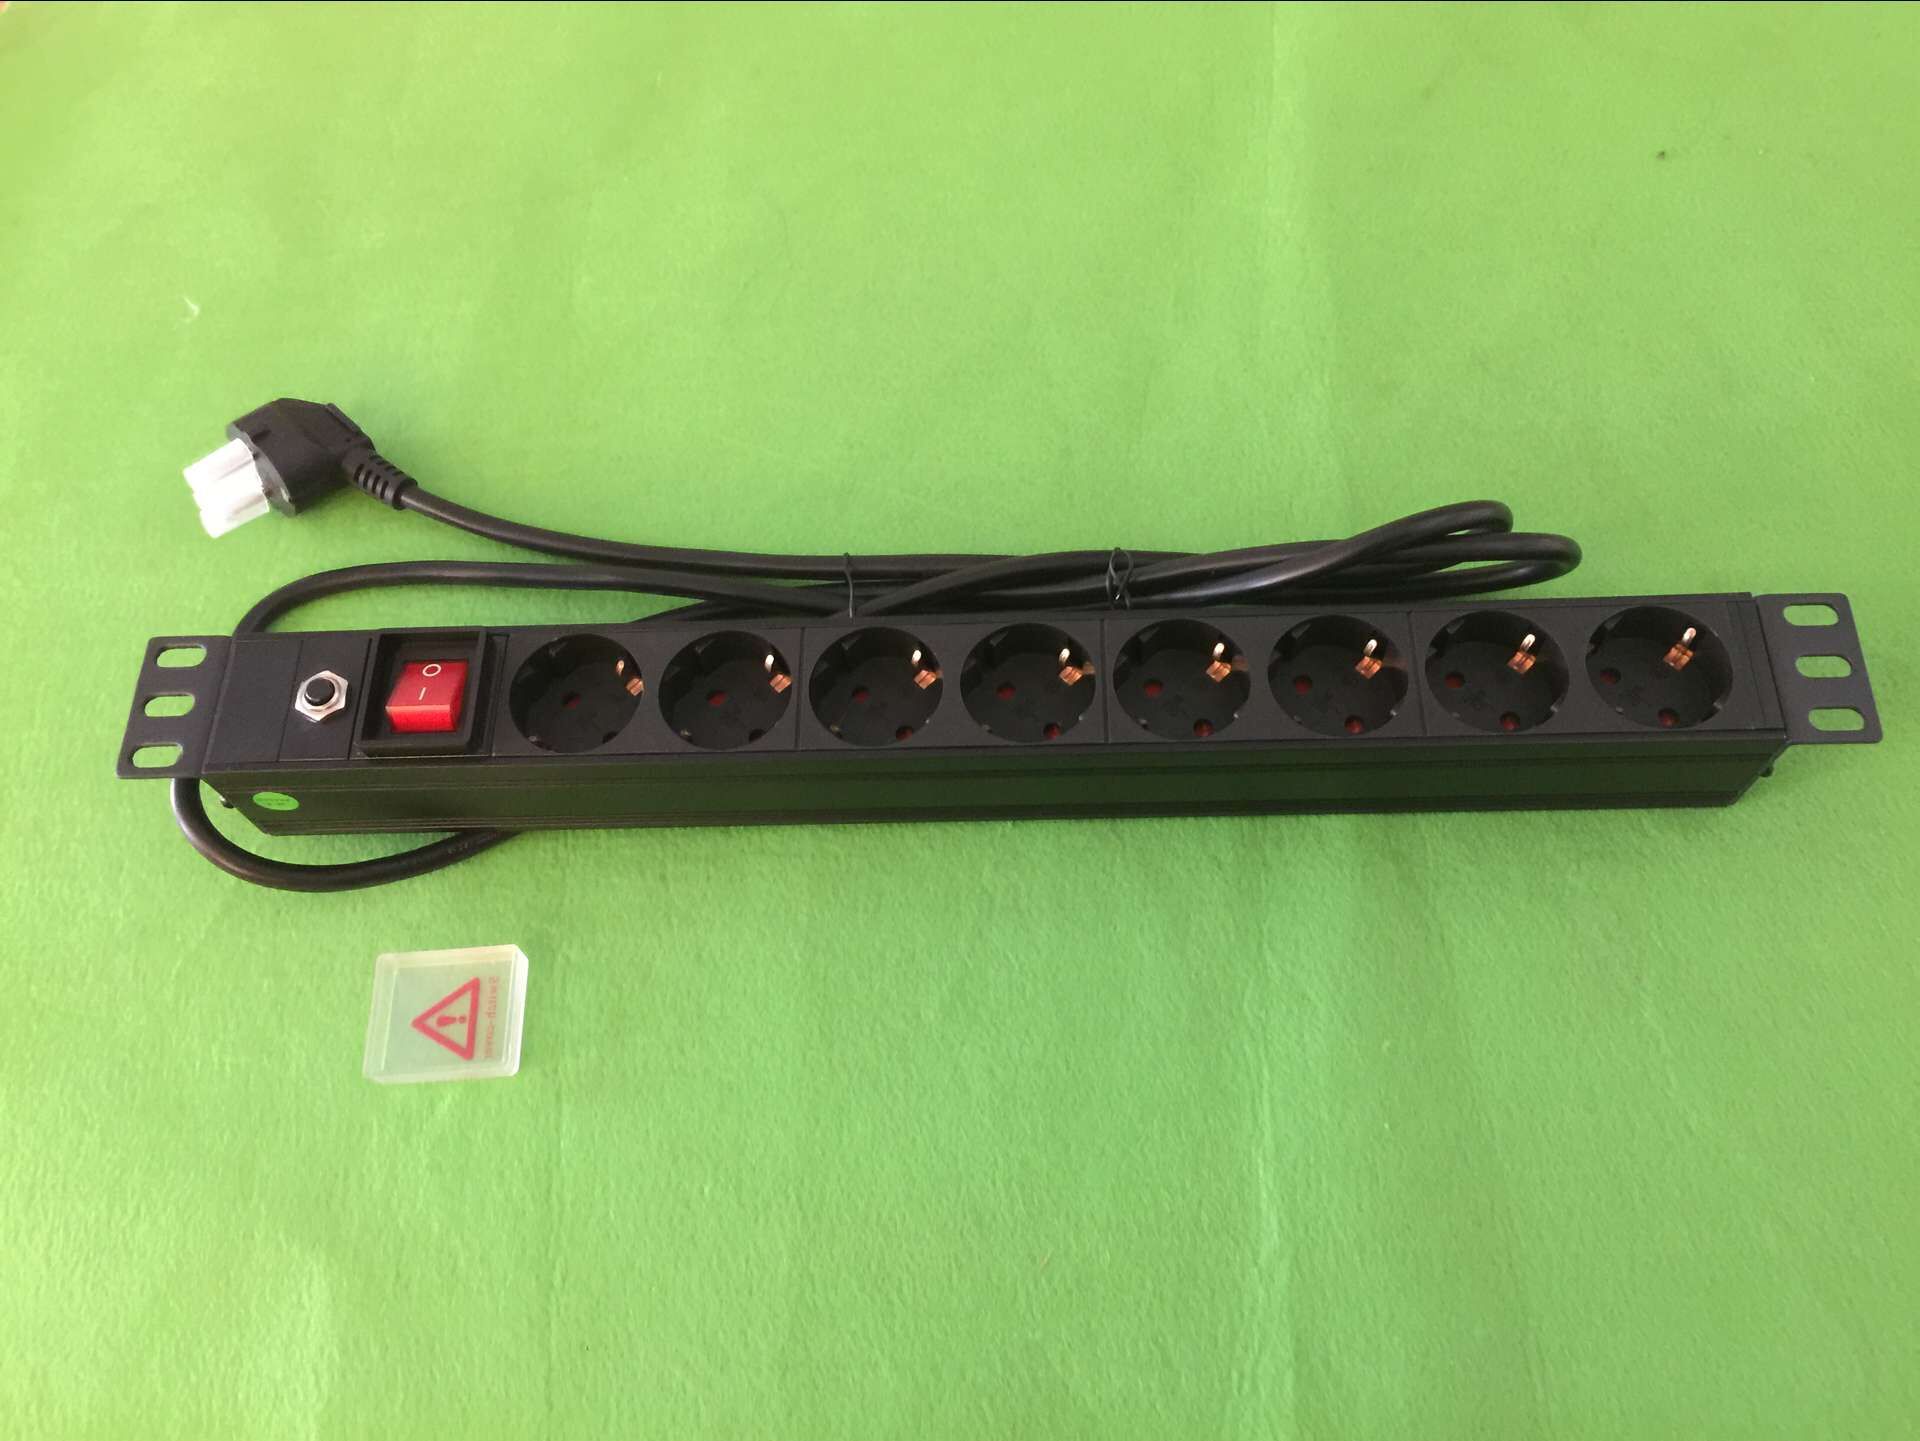 8 ways Germany socket PDU with switch and over load protection